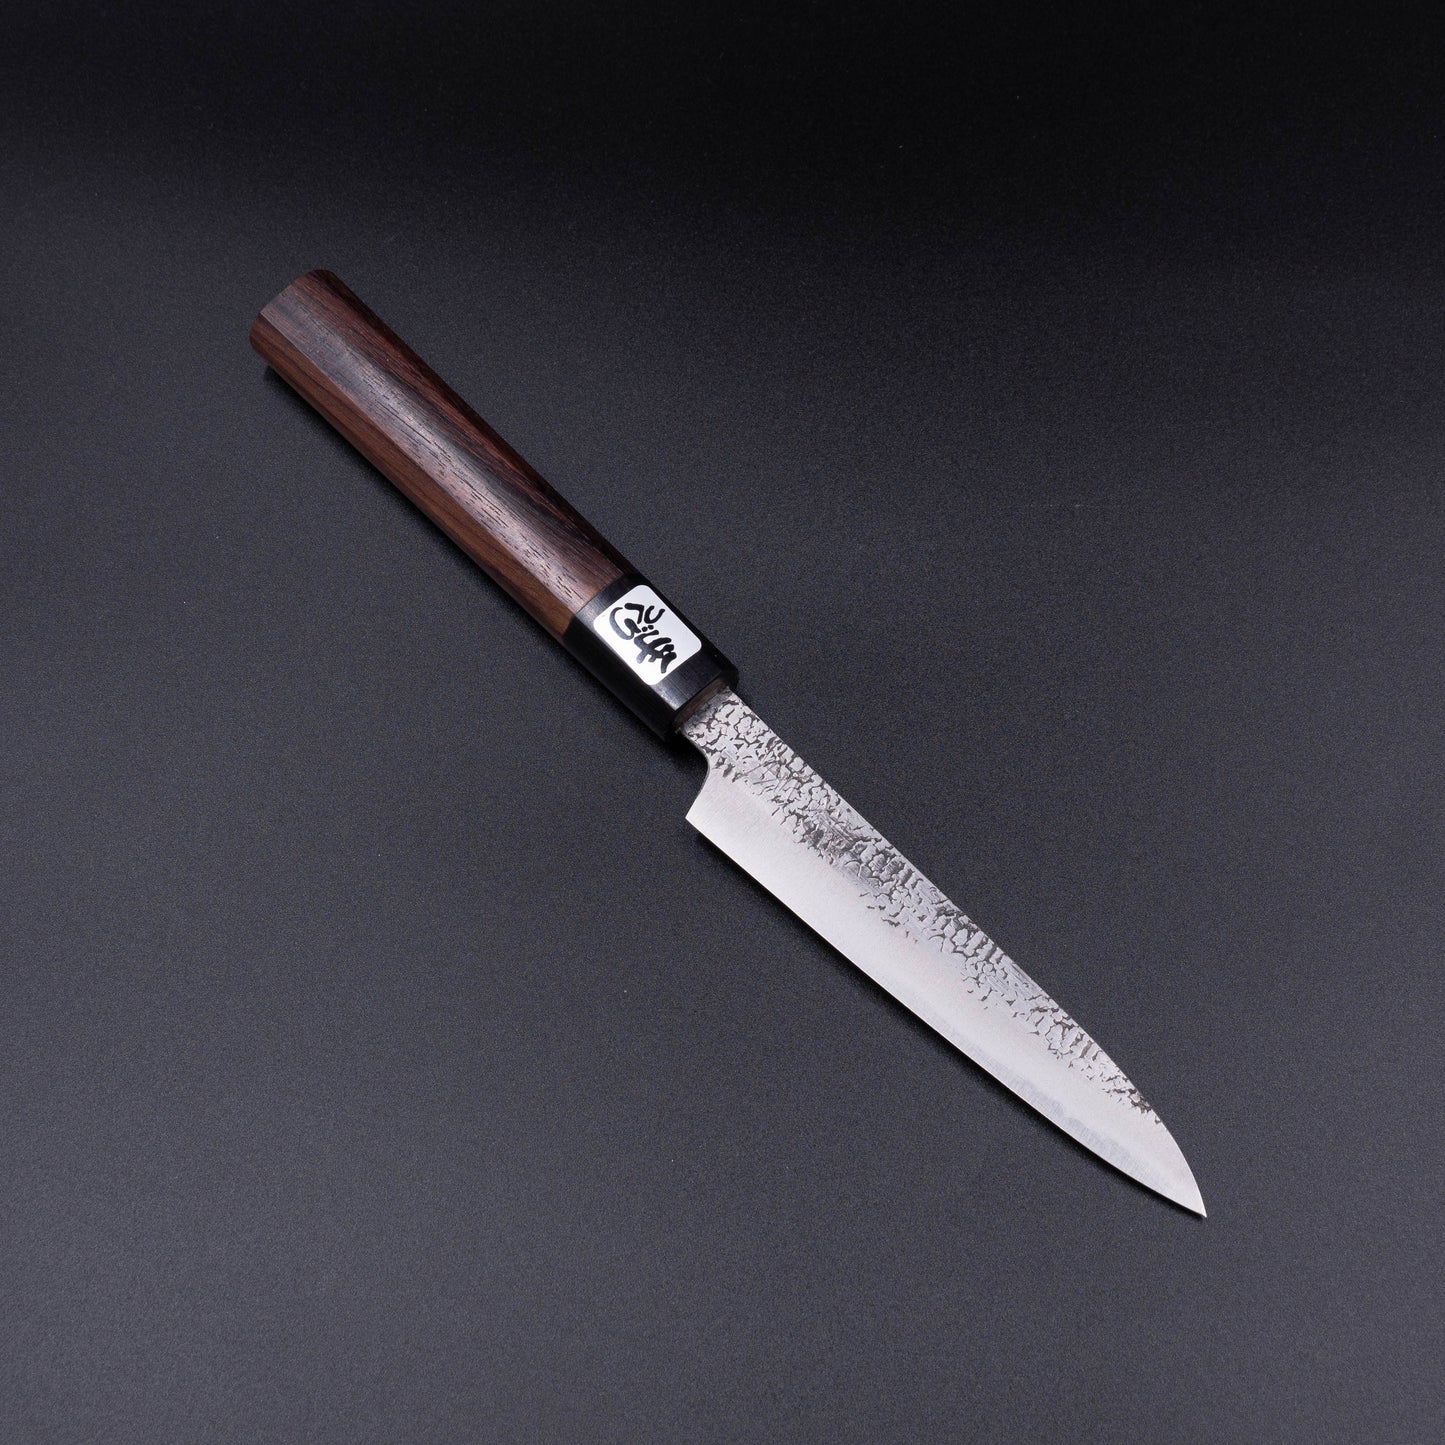 BlueSuper Carbon Steel Tsuchime StainlessClad Petty Rosewood Octagonal Handle